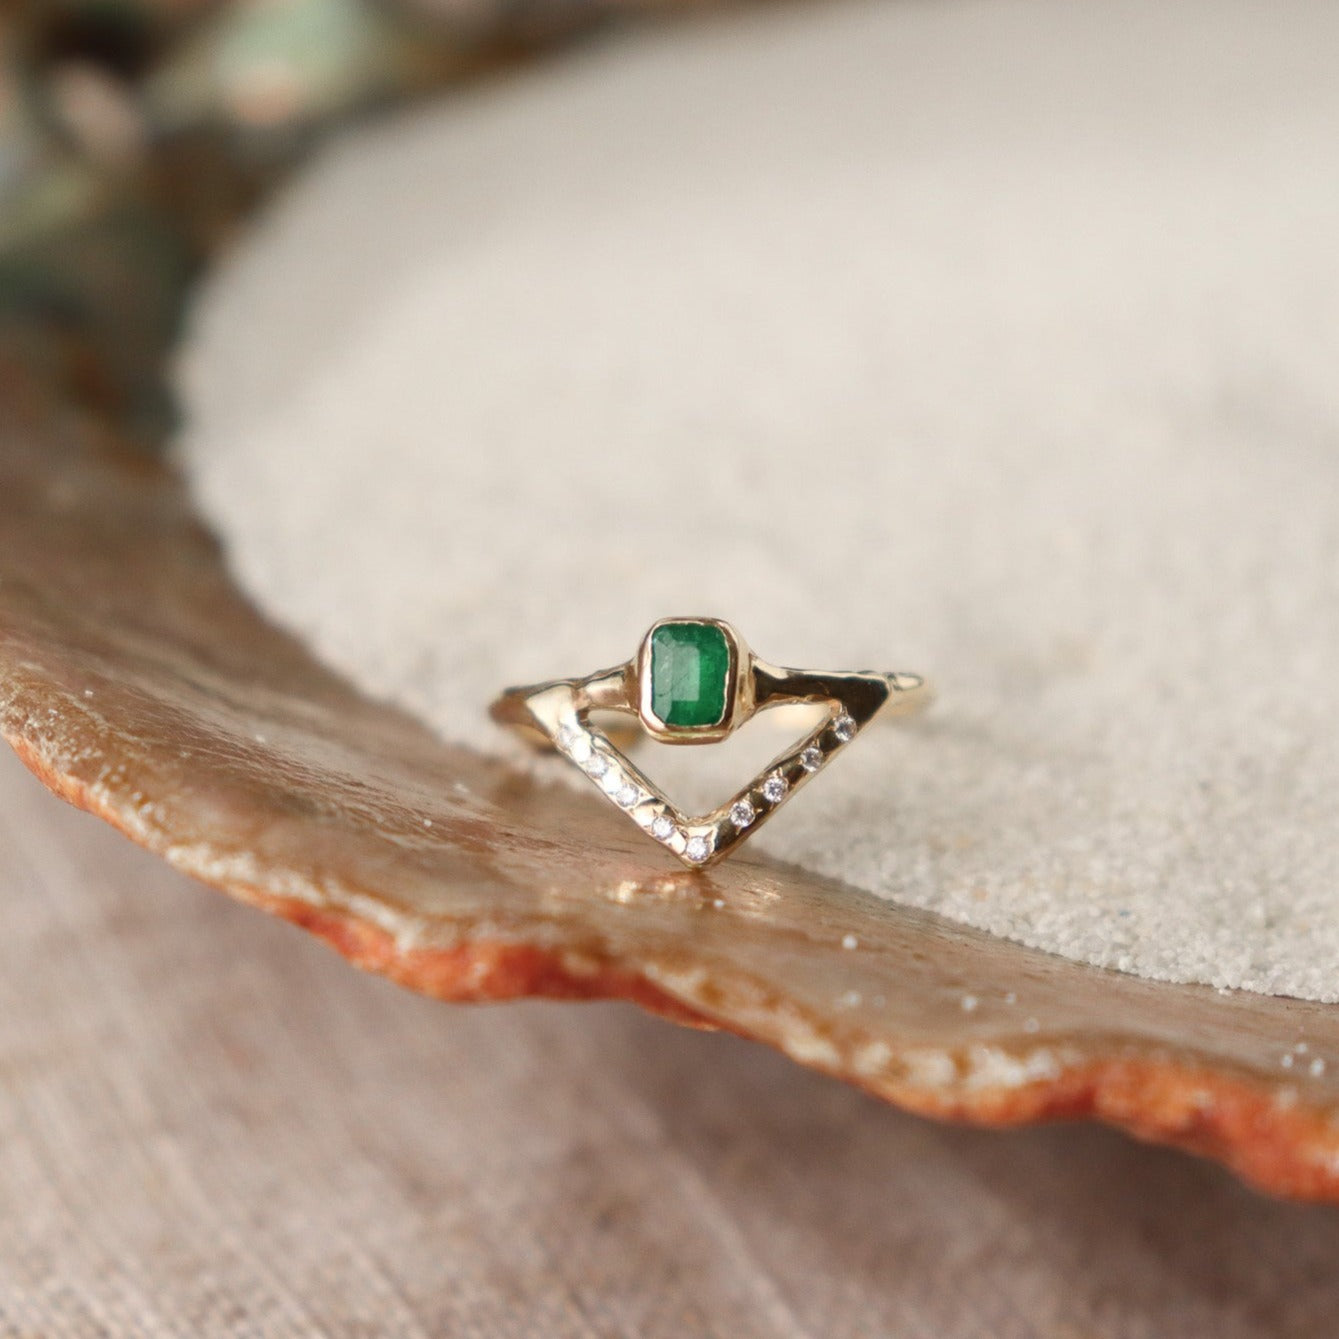 Stunning emerald ring with a bezel-set, rich green gemstone elegantly perched on a delicate, narrow band. Beneath it, a gracefully designed V-band features organically set diamonds, adding a touch of nature-inspired luxury to your jewelry collection.